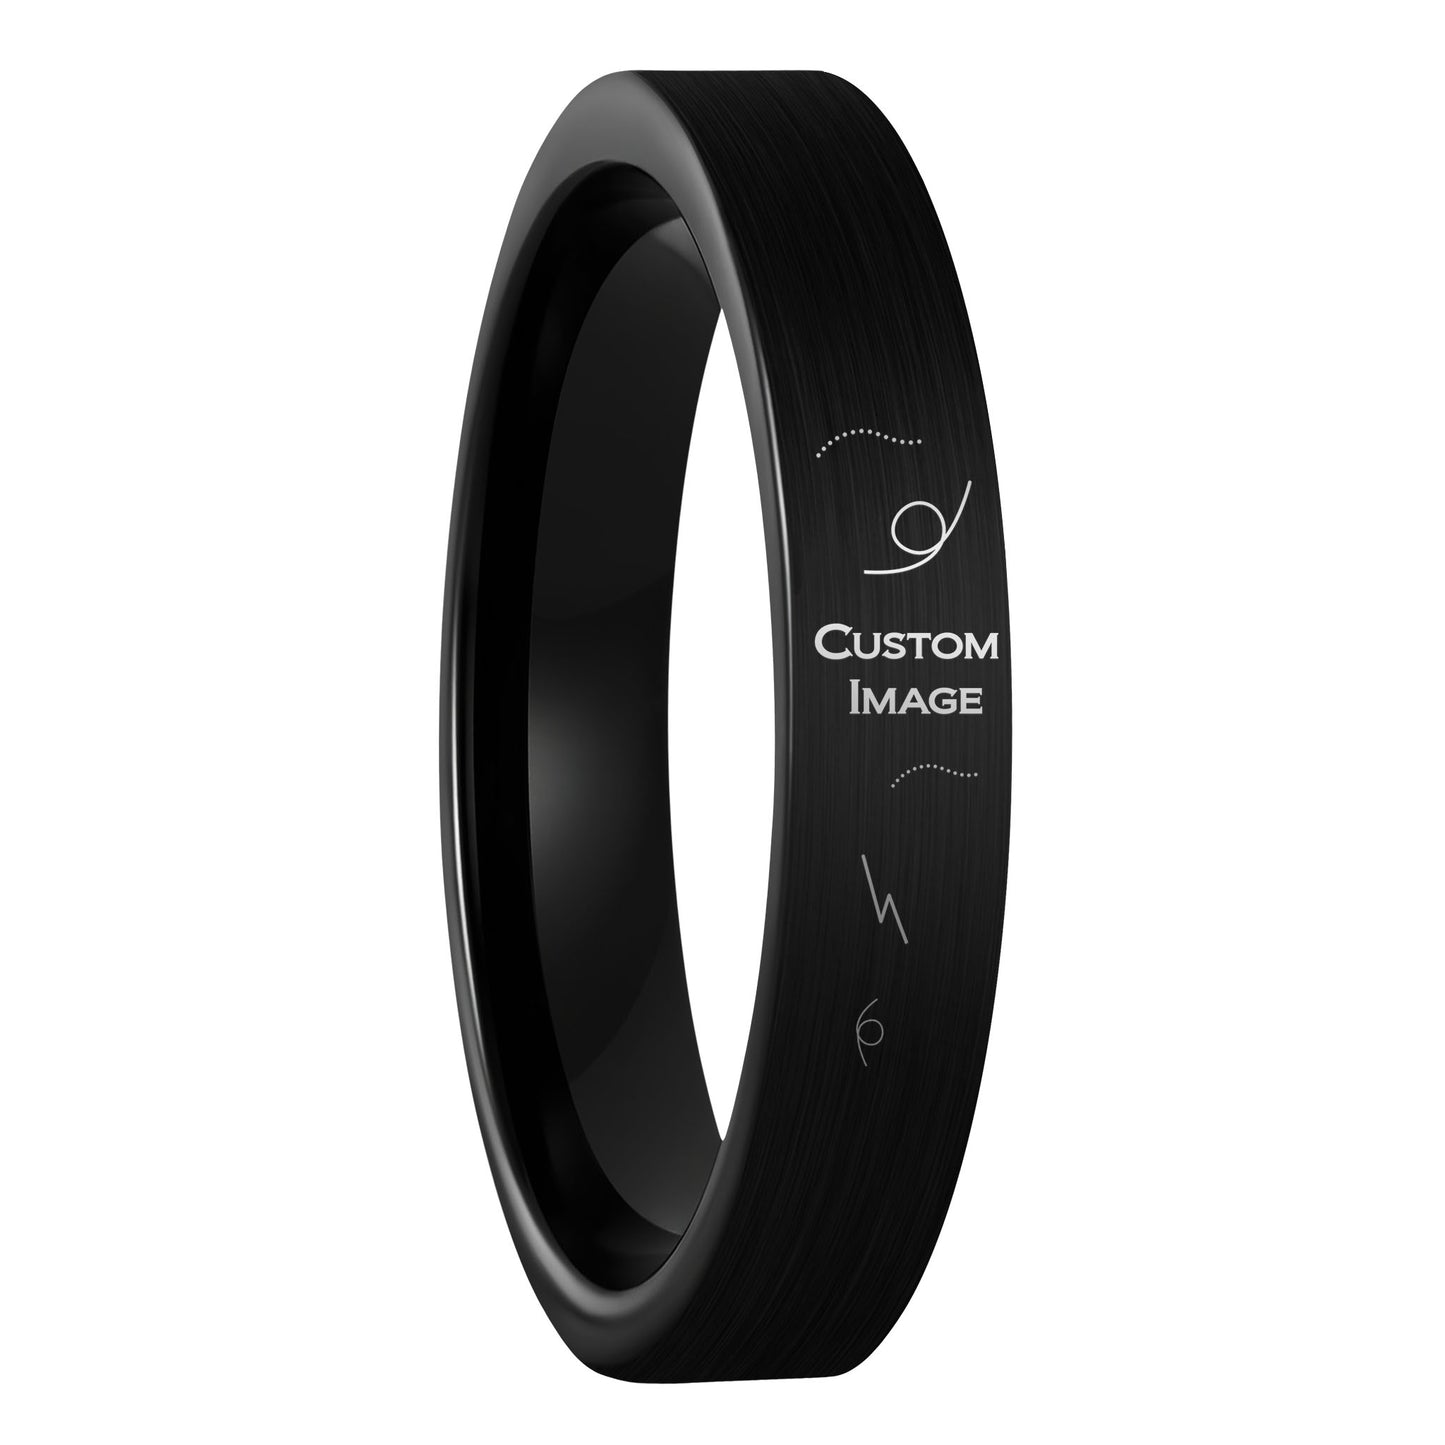 A custom image engraved brushed black tungsten women's wedding band displayed on a plain white background.